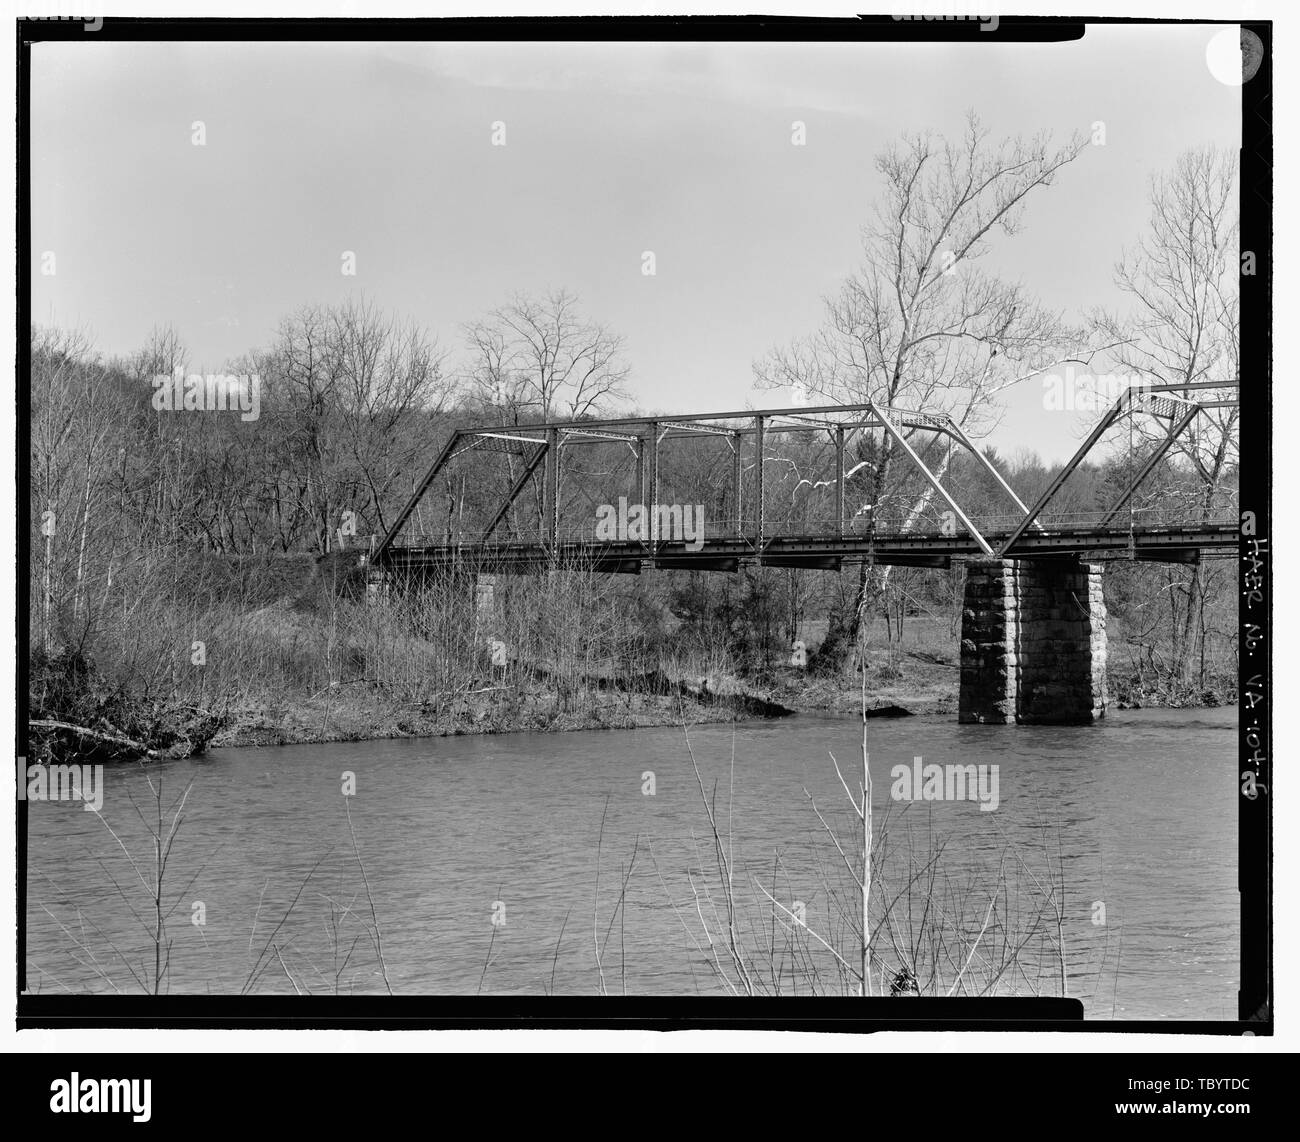 NORTH ELEVATION OF THE EAST SPAN, LOOKING SOUTHEAST  McPherson's Ford Bridge, State Route 633 over Cowpasture River, Clifton Forge, Alleghany County, VA Nelson and Buchanan McPherson, William H Meyer, Lauren, transmitter Harns, Bruce A, photographer Casella, Richard M, historian Helms, Alison, historian Stock Photo